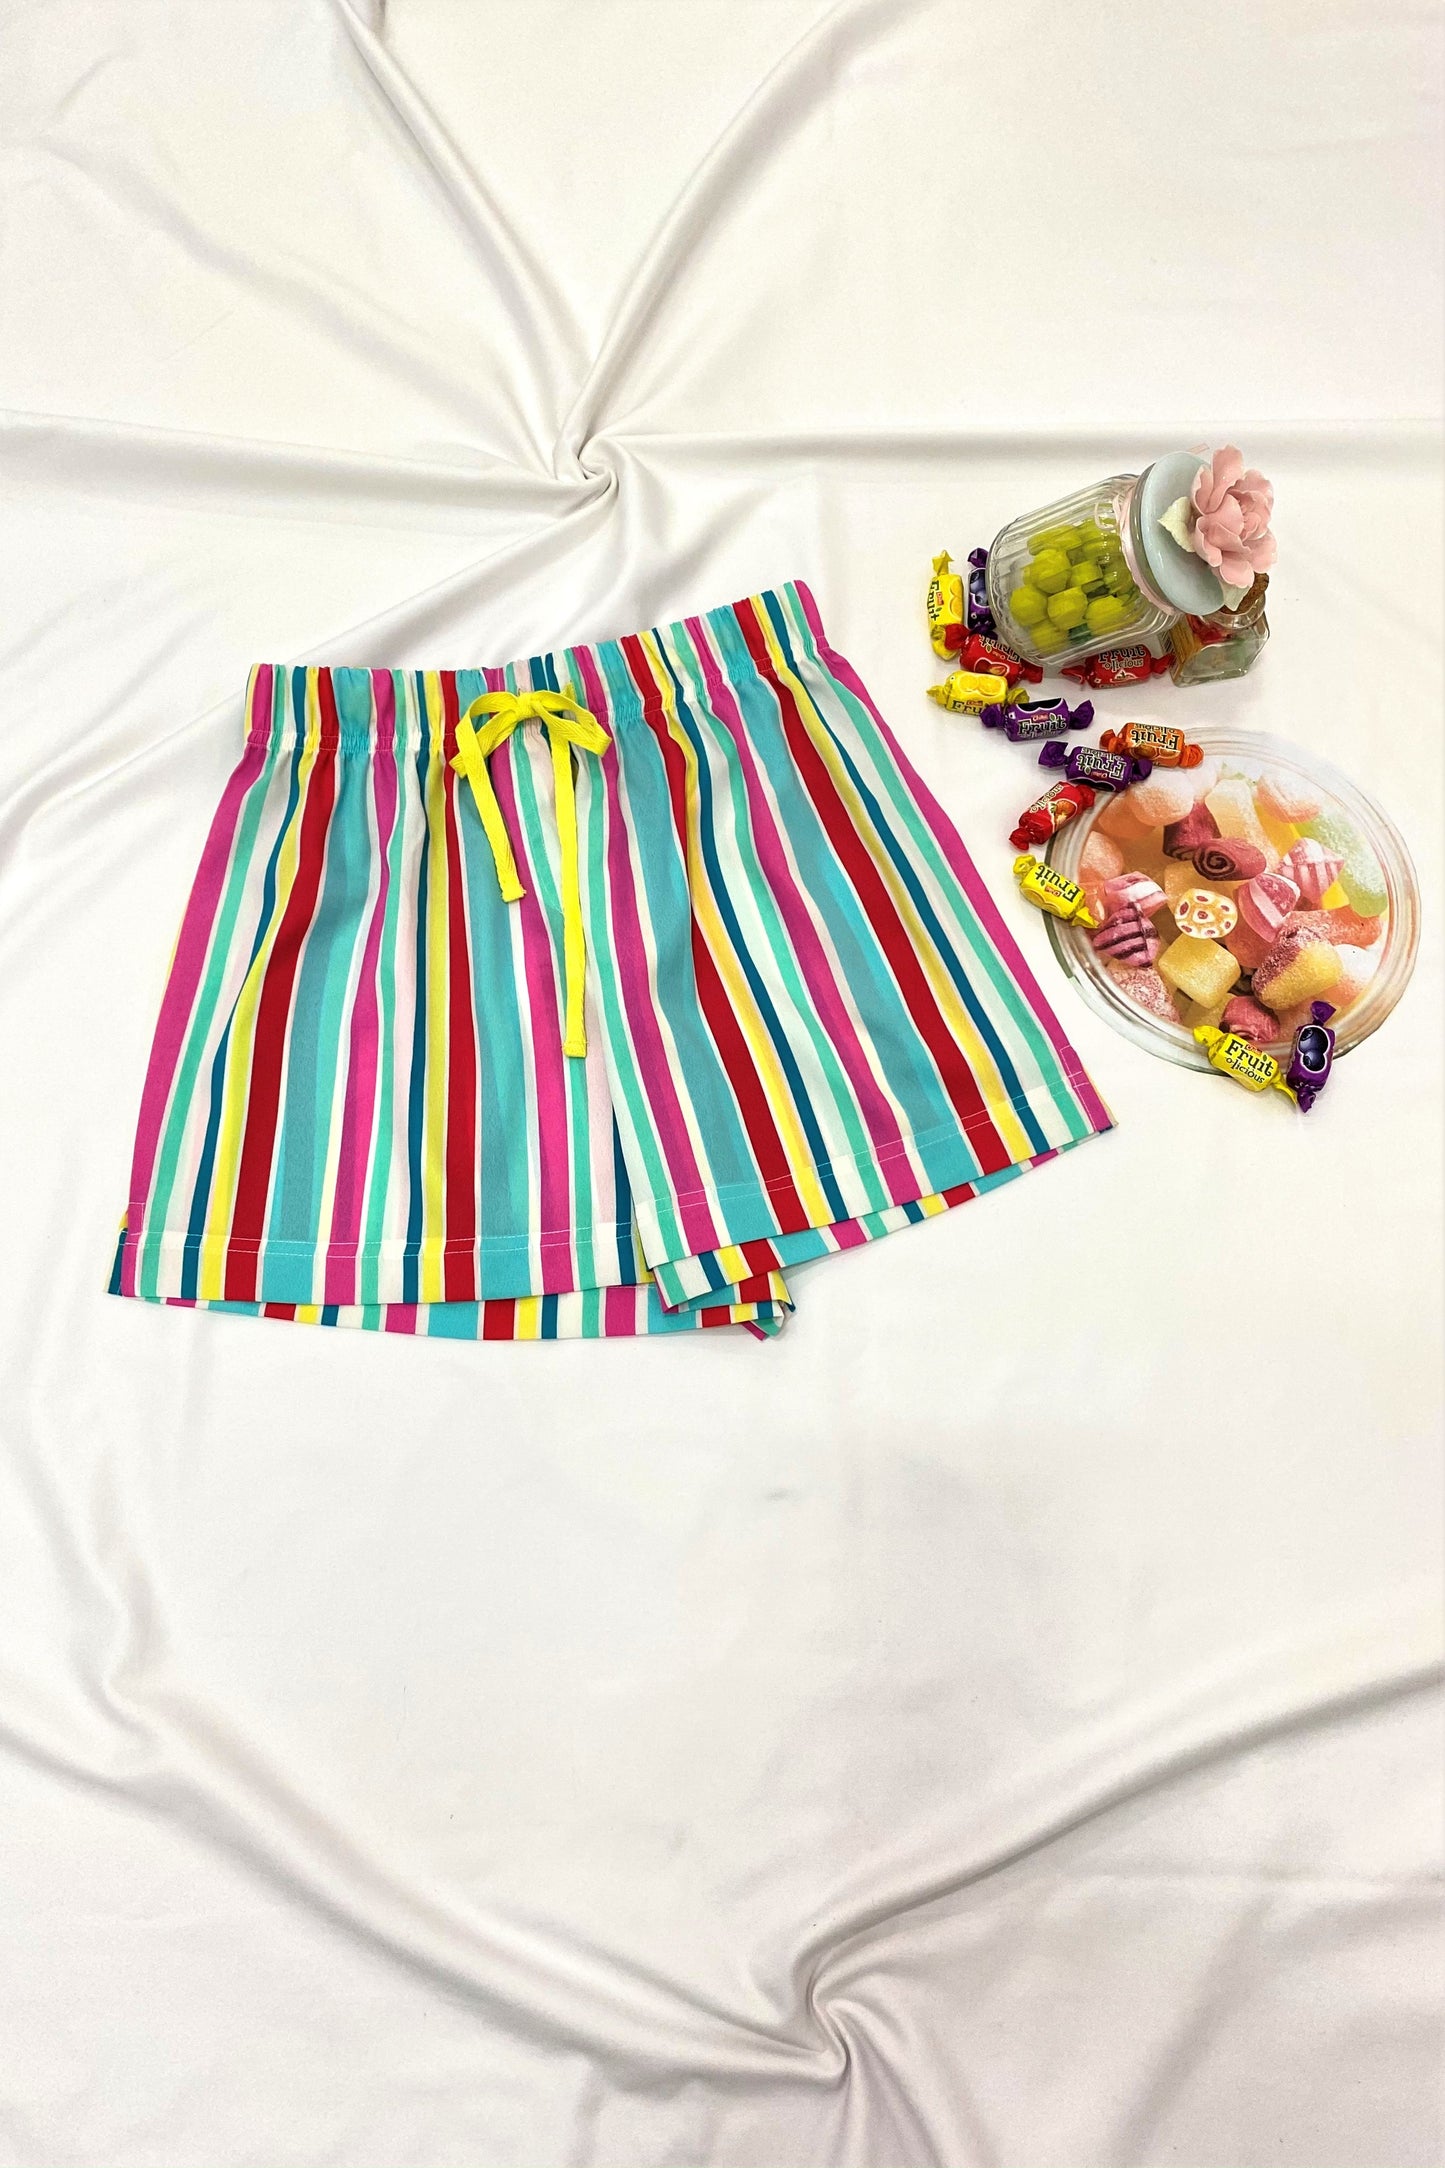 Women's Crepe Shorts Combo (Pack of 2) - Candy Yellow